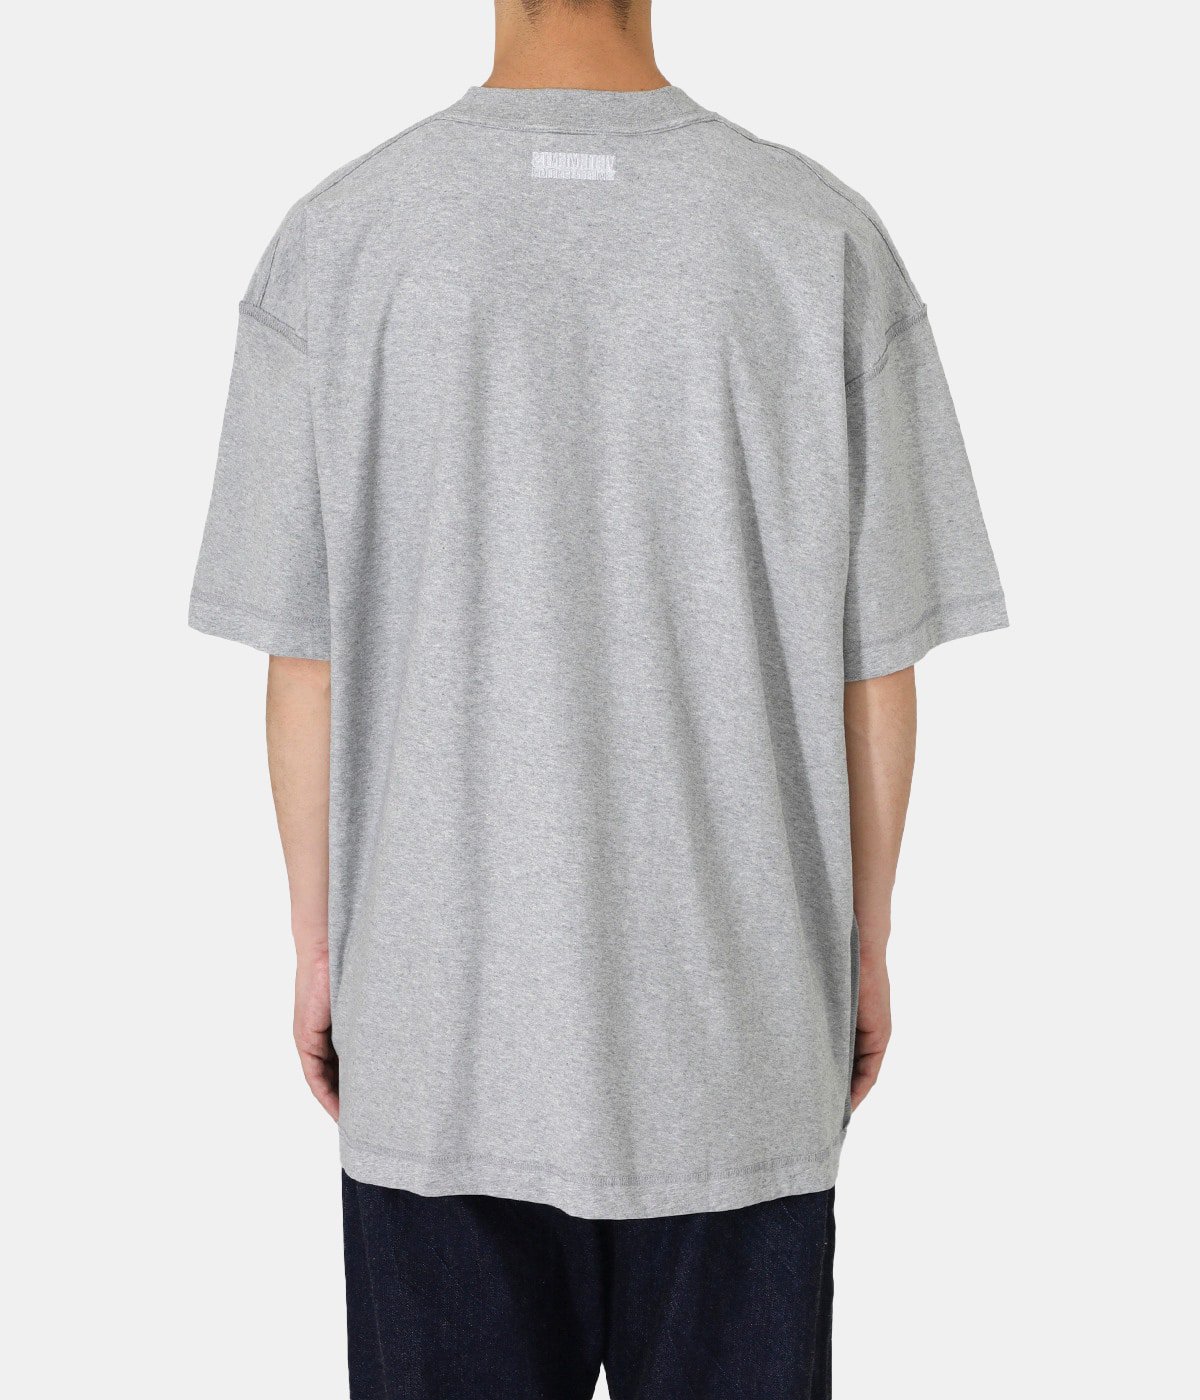 ALL GREY INSIDE-OUT T-SHIRT | VETEMENTS(ヴェトモン) / トップス 